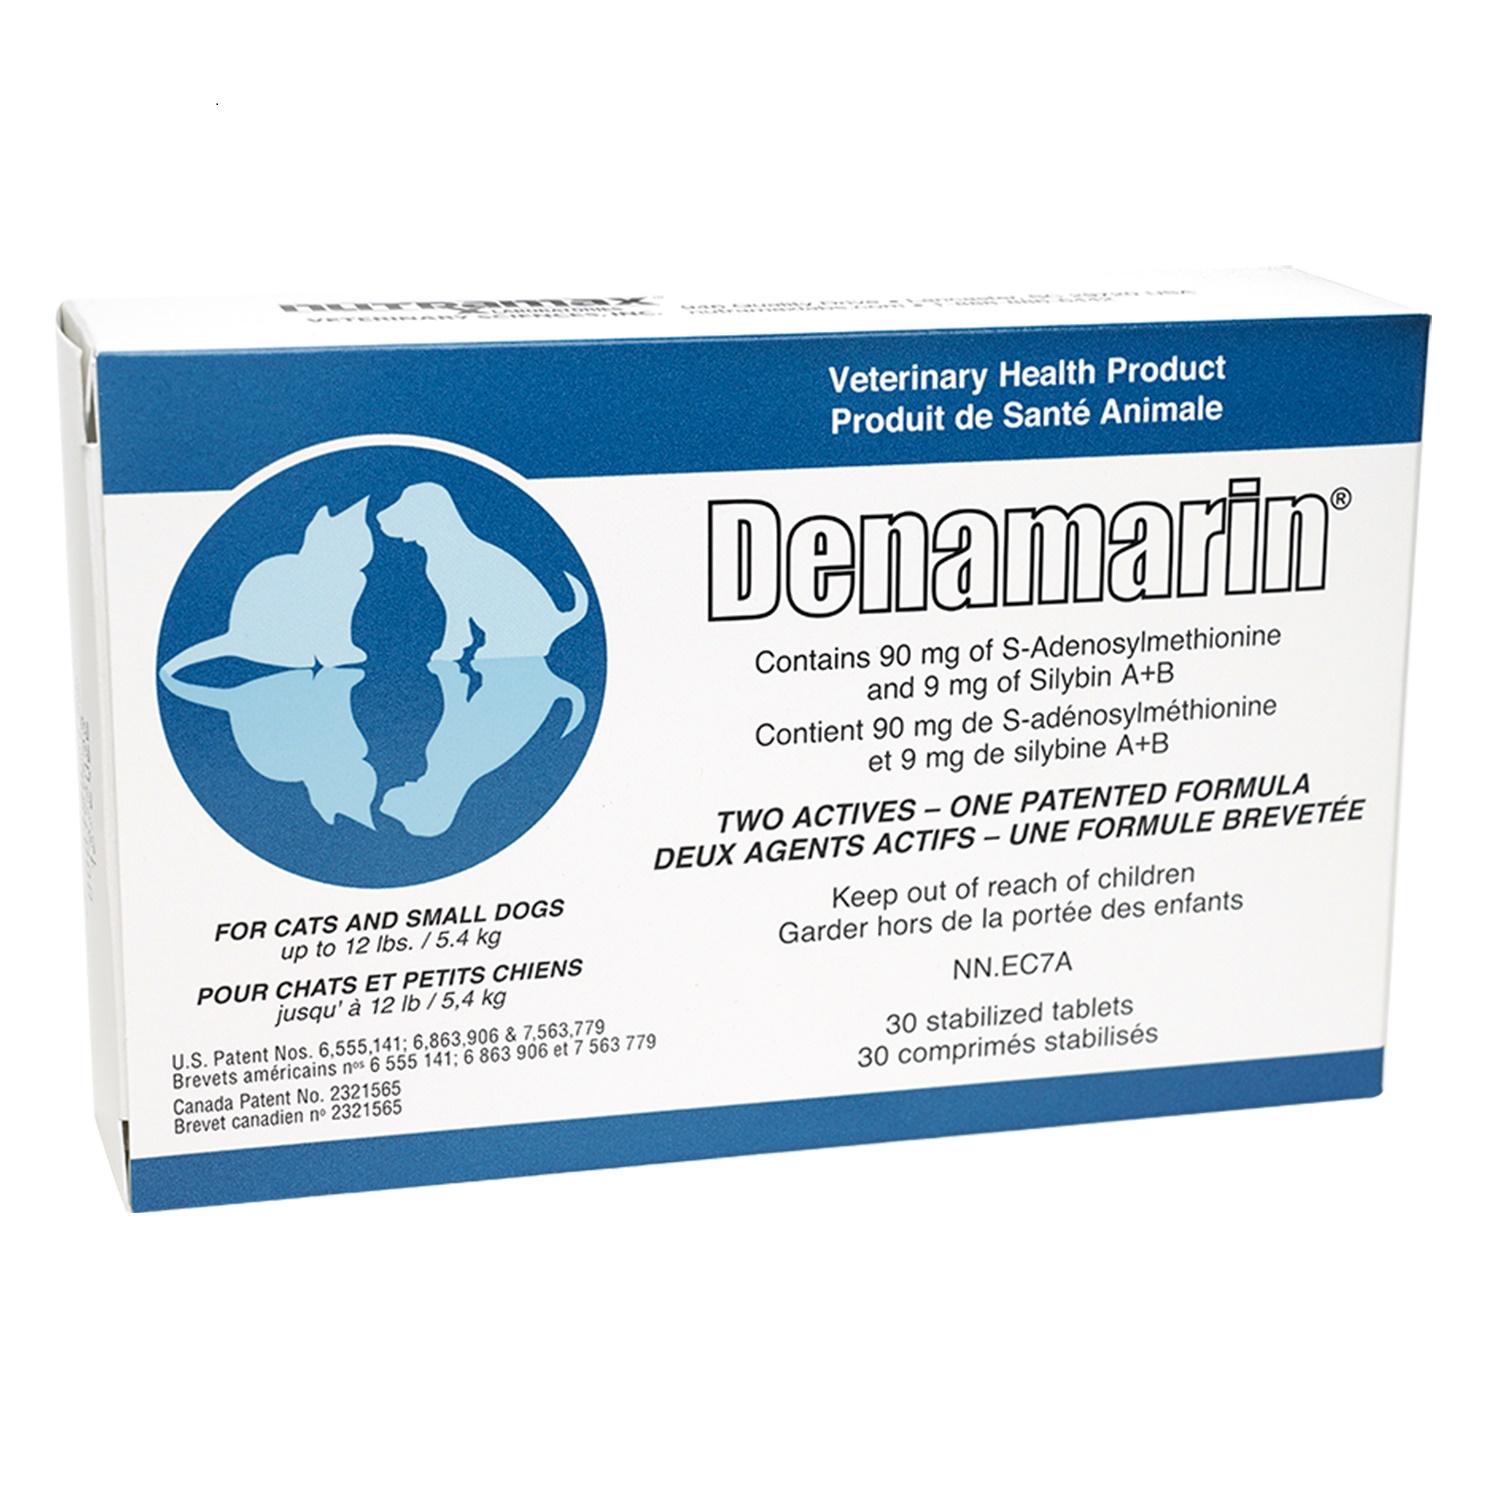 What Is The Difference Between Denamarin And Denamarin Advanced